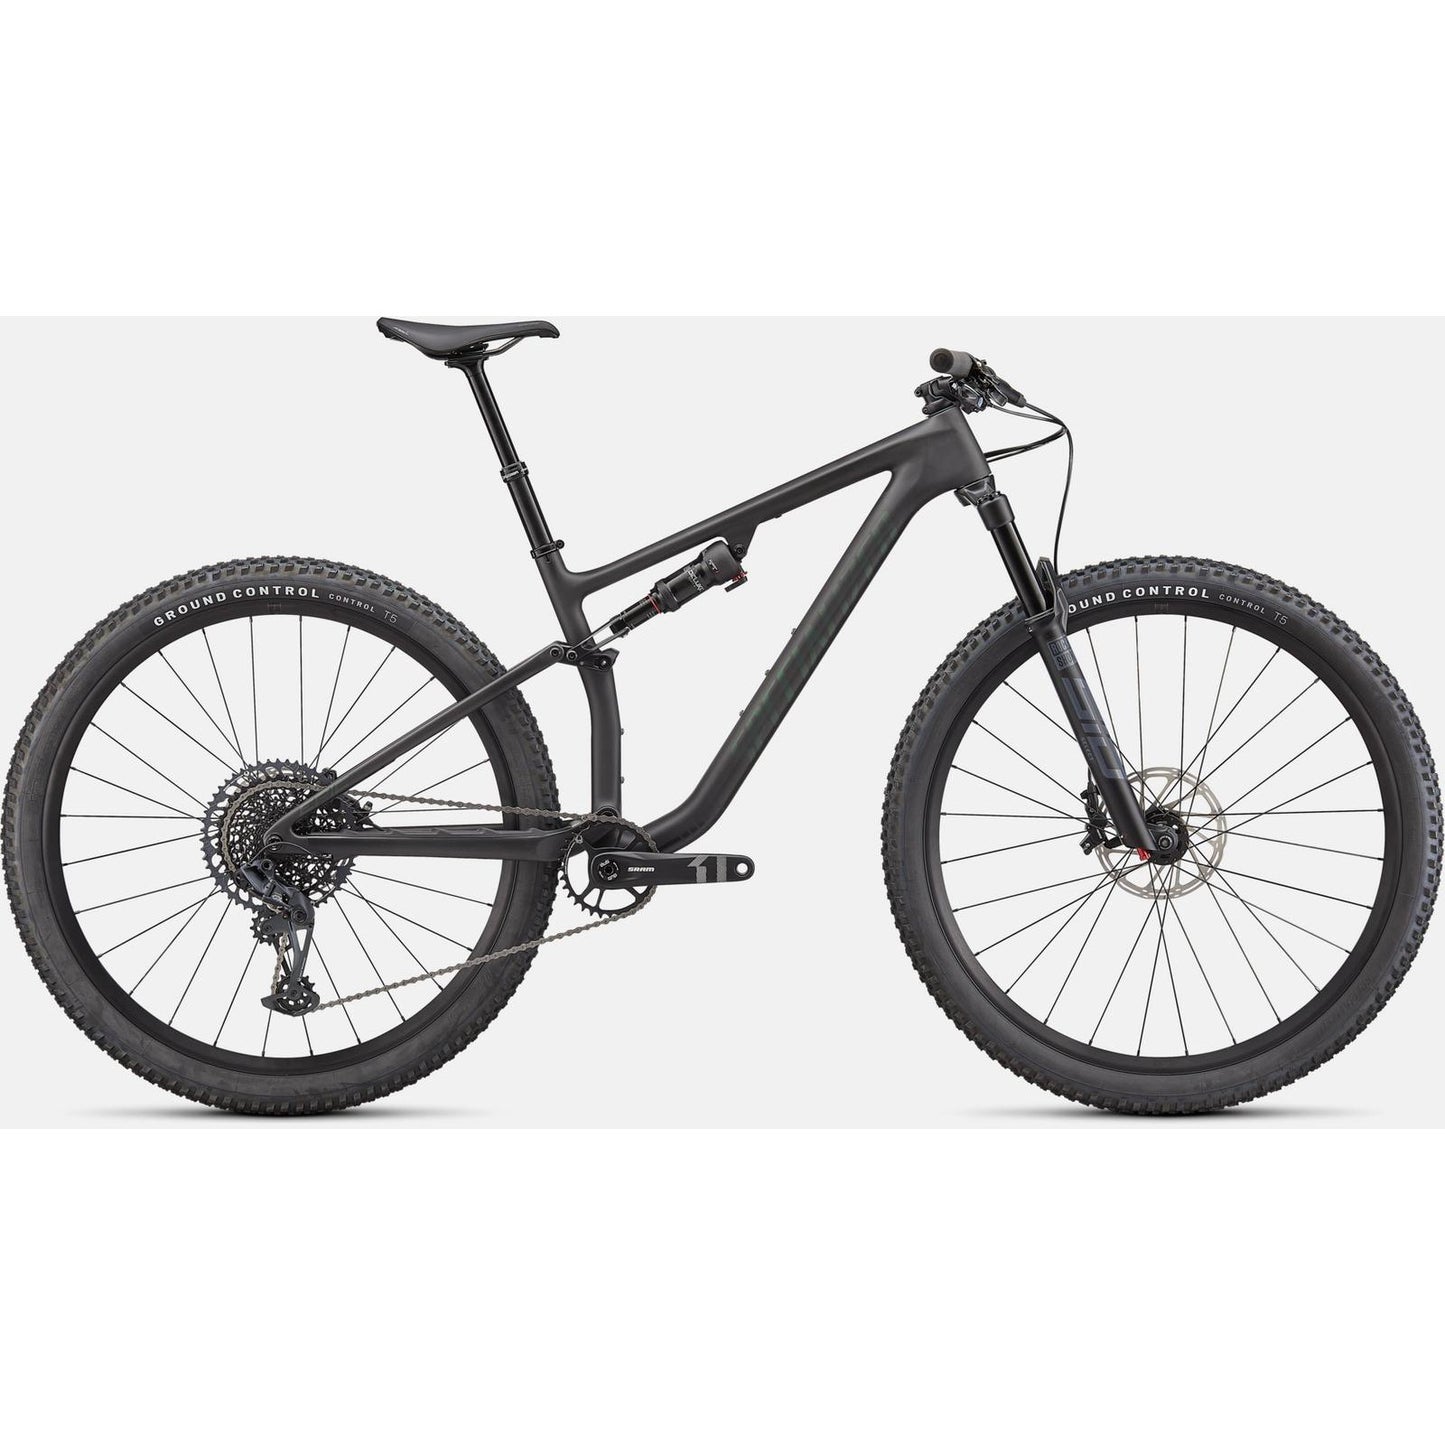 Specialized Epic Evo Comp Full Suspension 29" Mountain Bike 2022 - Bikes - Bicycle Warehouse